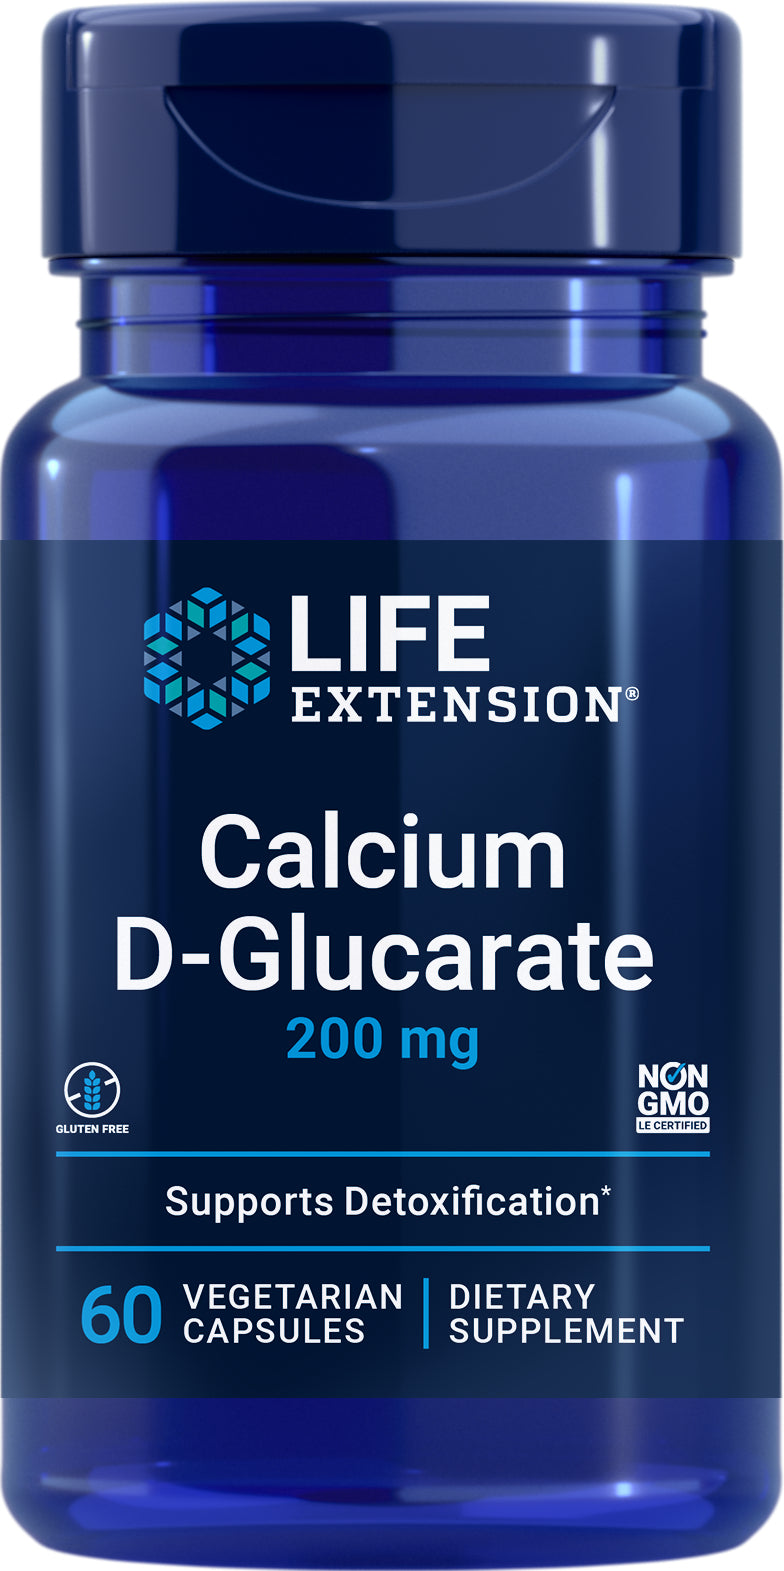 Calcium D-Glucarate 200 mg, 60 veg caps by Life Extension